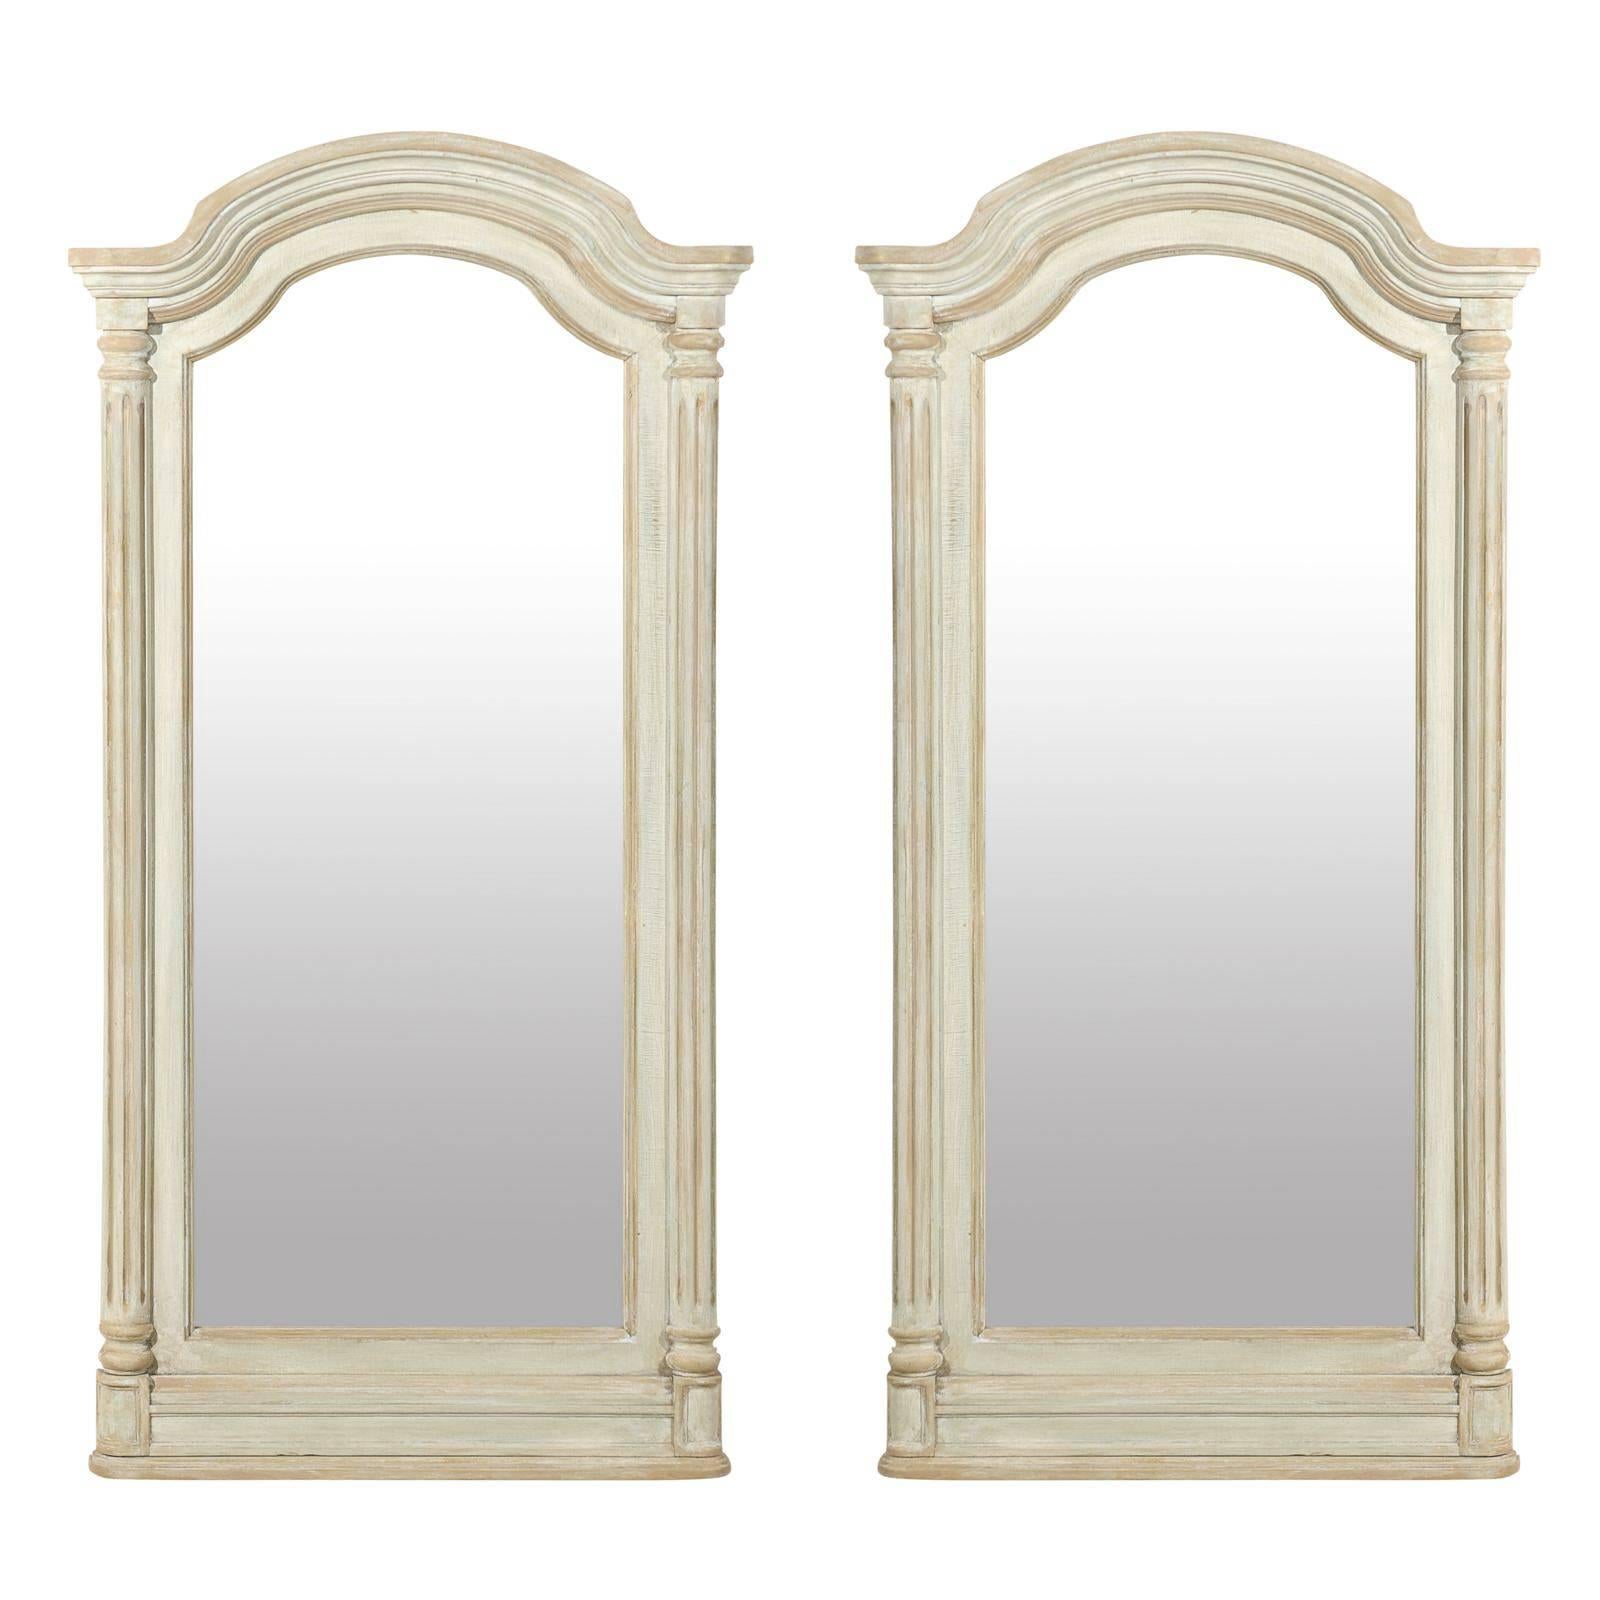 Pair of American Painted Wood Mirrors with Arched Crest